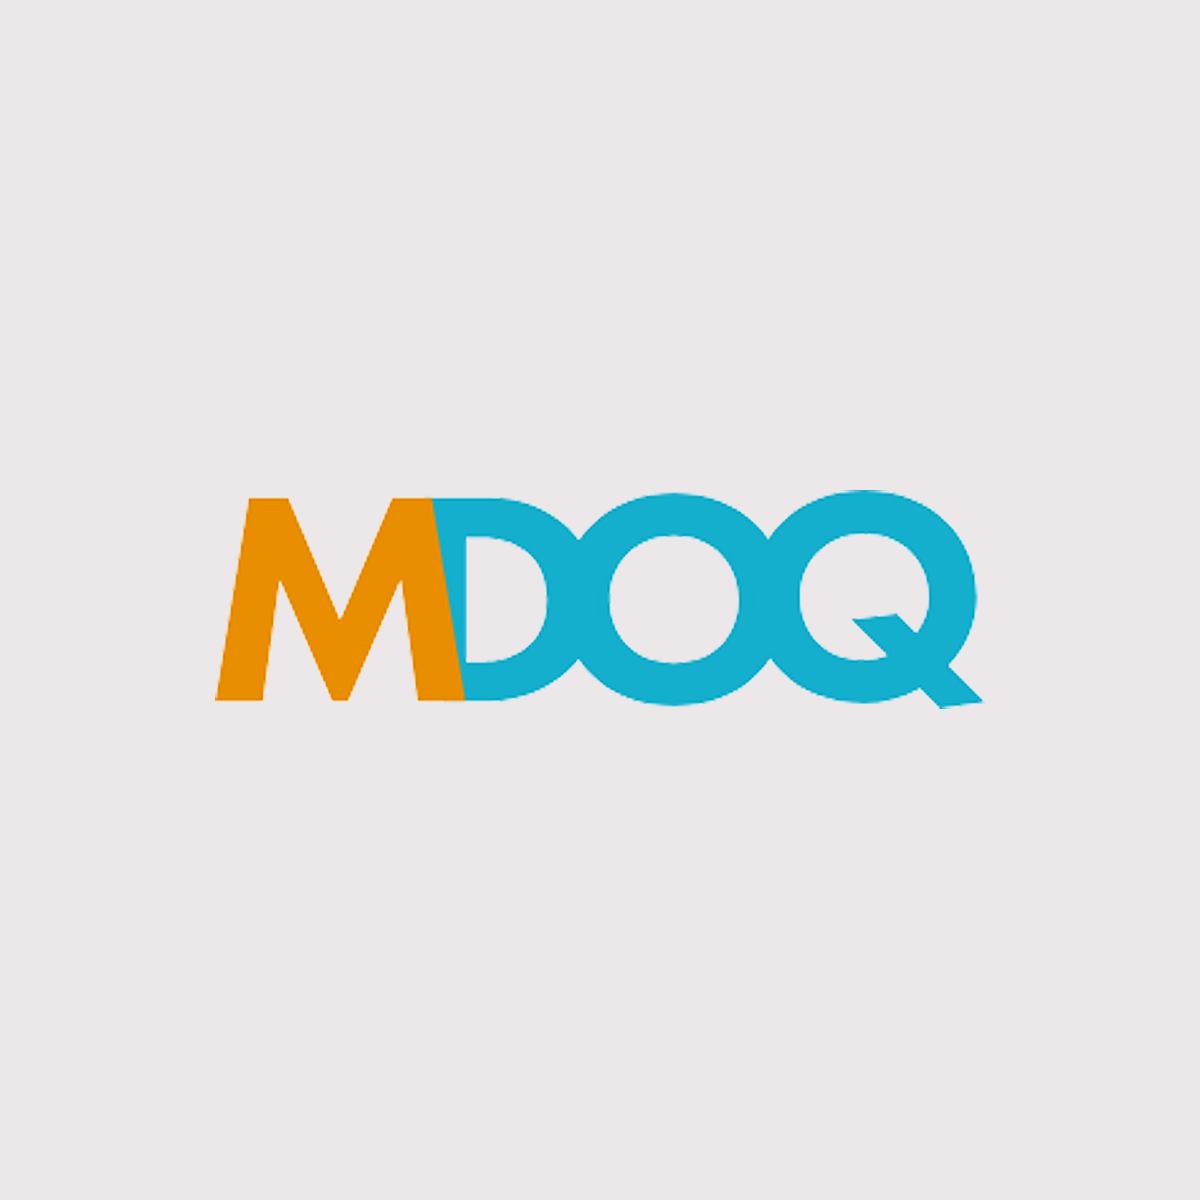 How MDOQ Helped Professional Books with 3x Performance